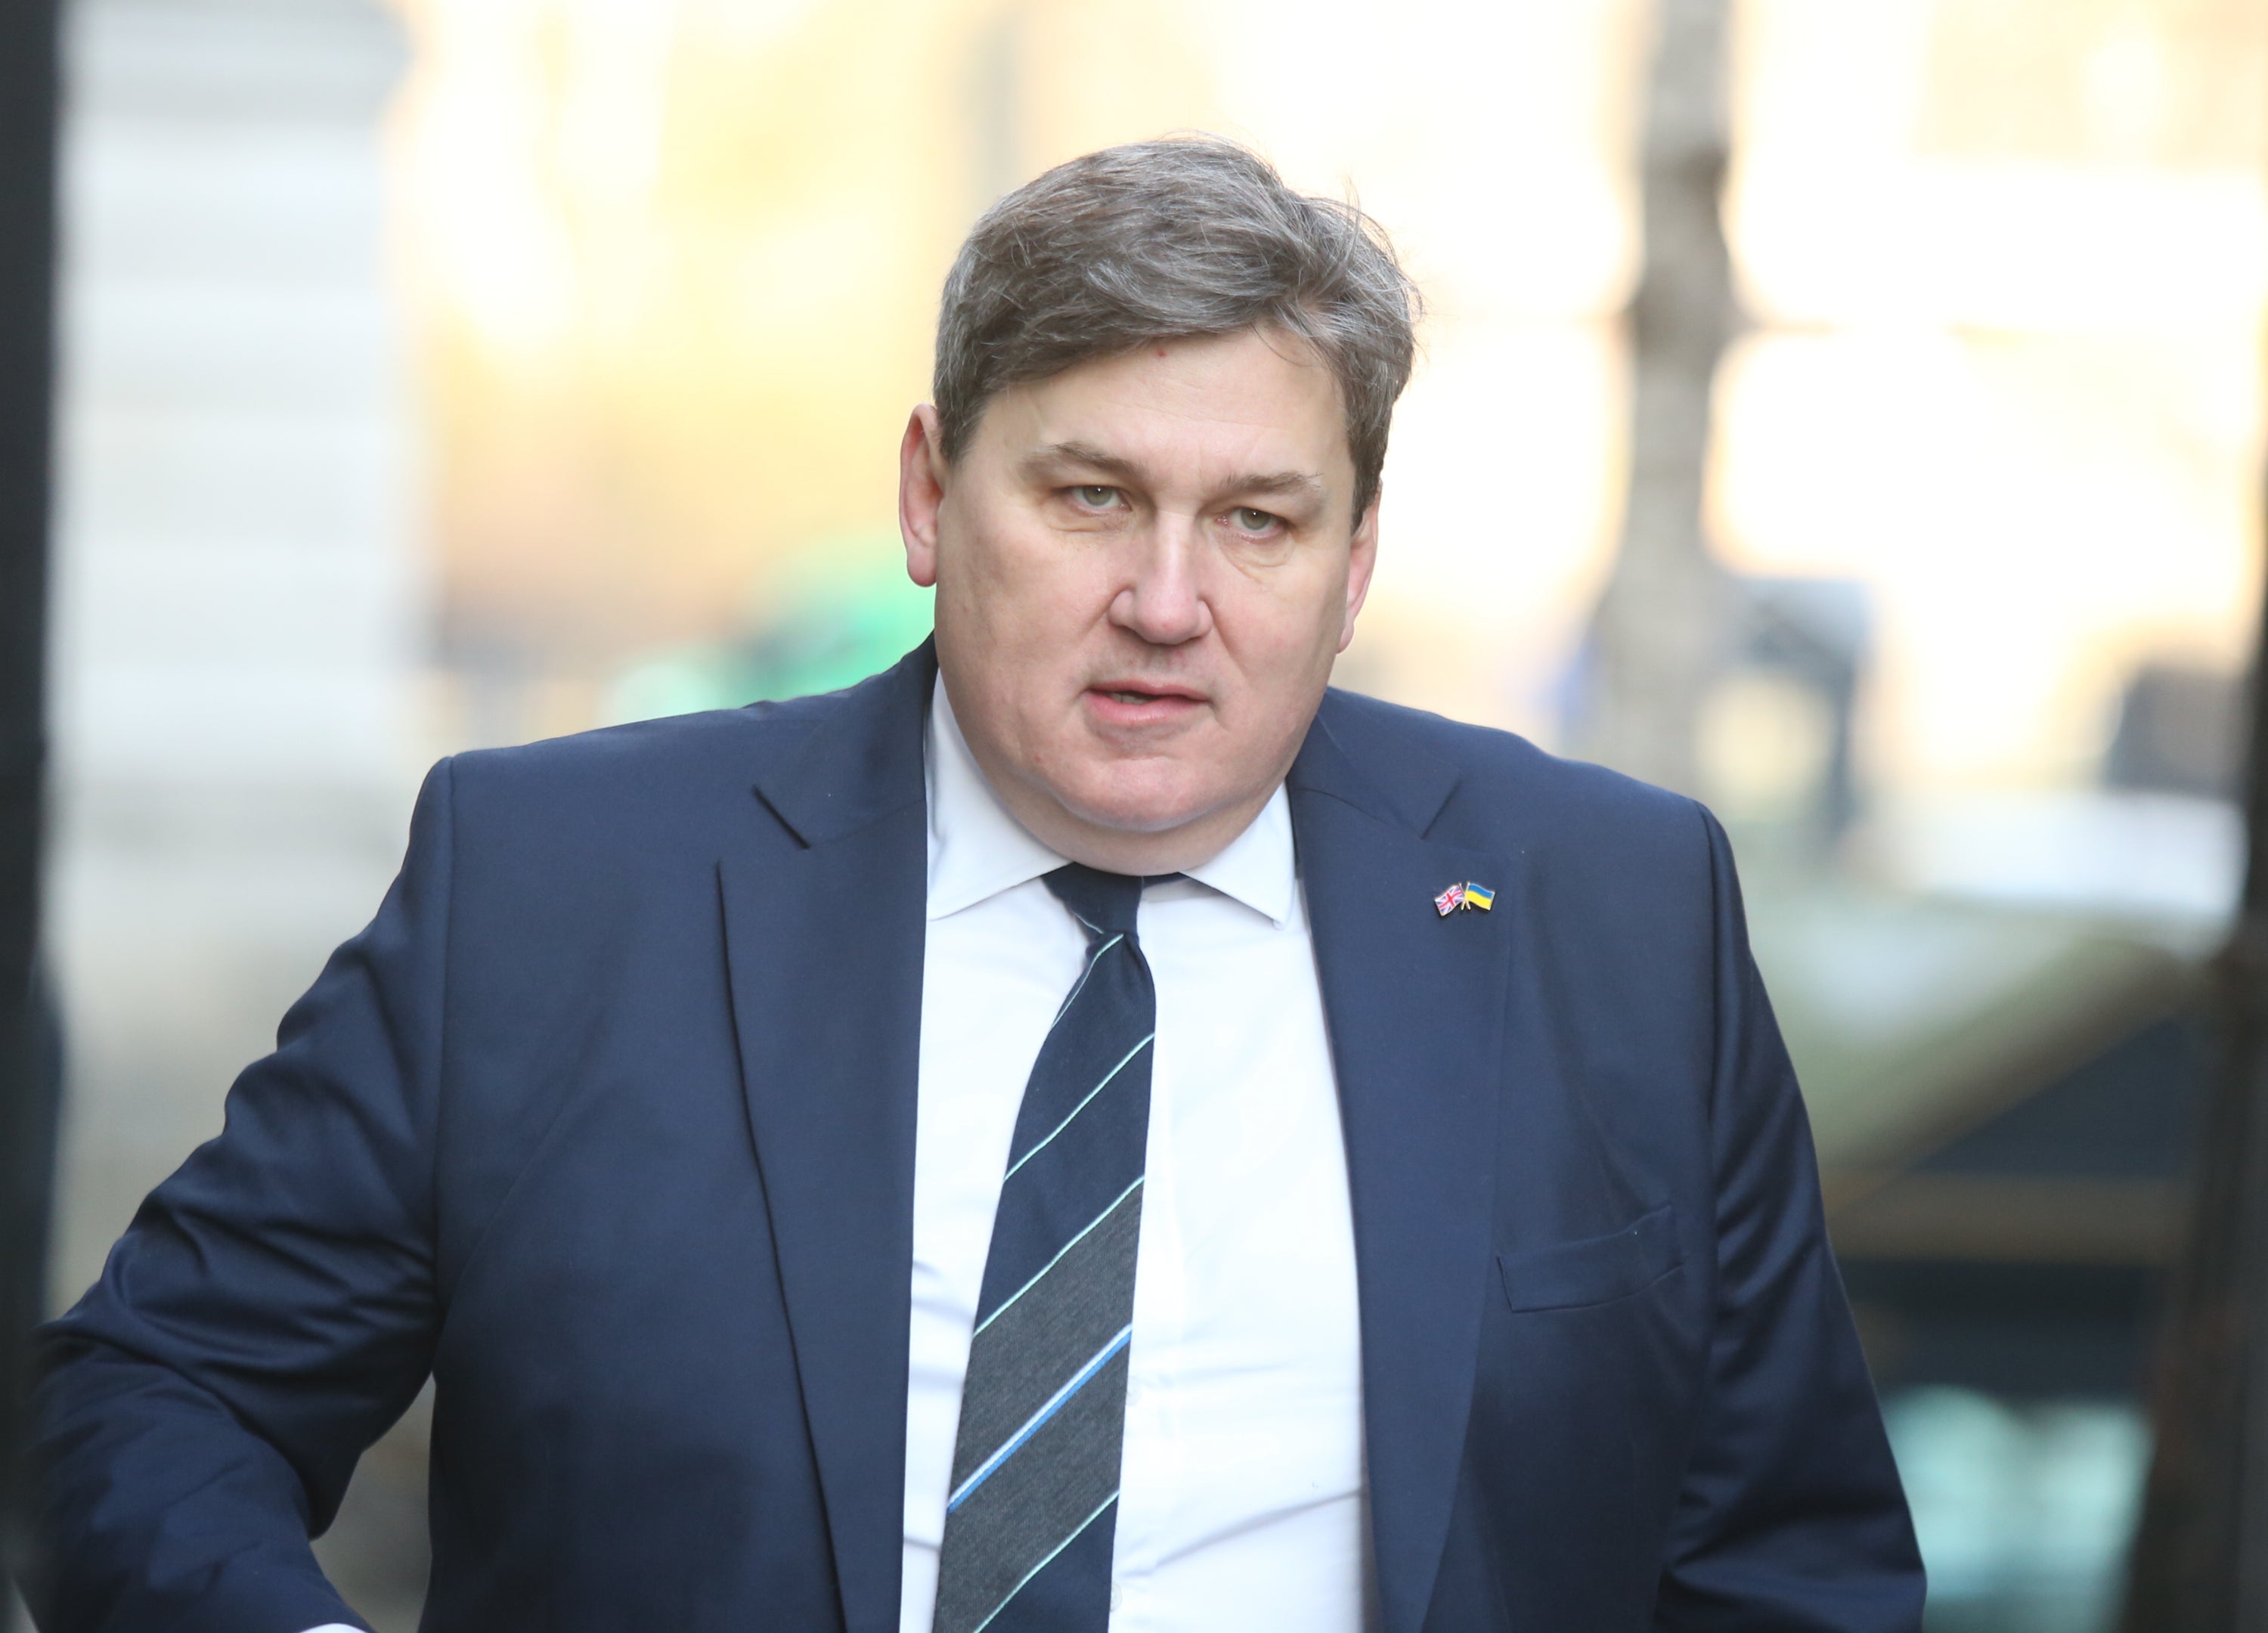 Policing minister Kit Malthouse said the report’s findings were ‘alarming’ (James Manning/PA)